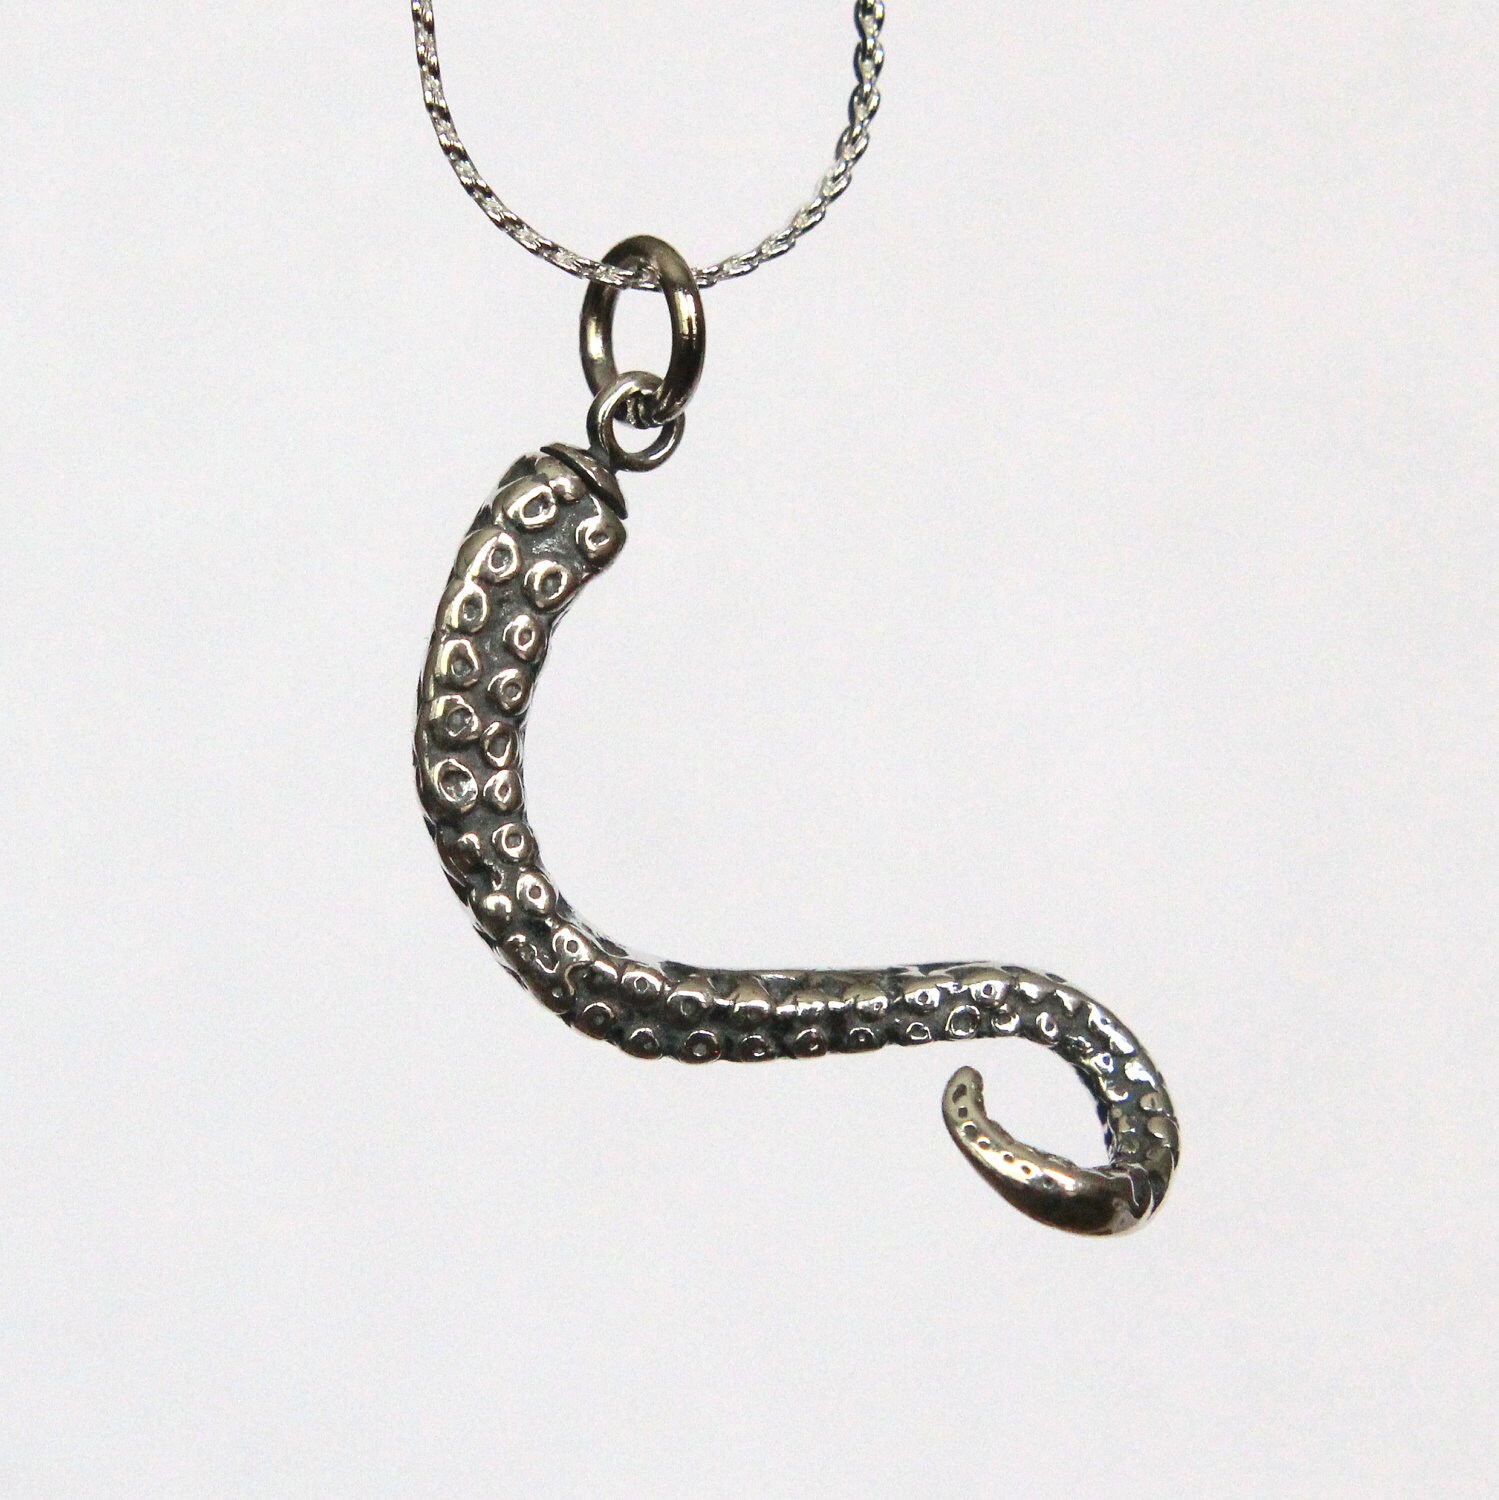 Octopus Tentacle Necklace in Solid Sterling Silver Octopus